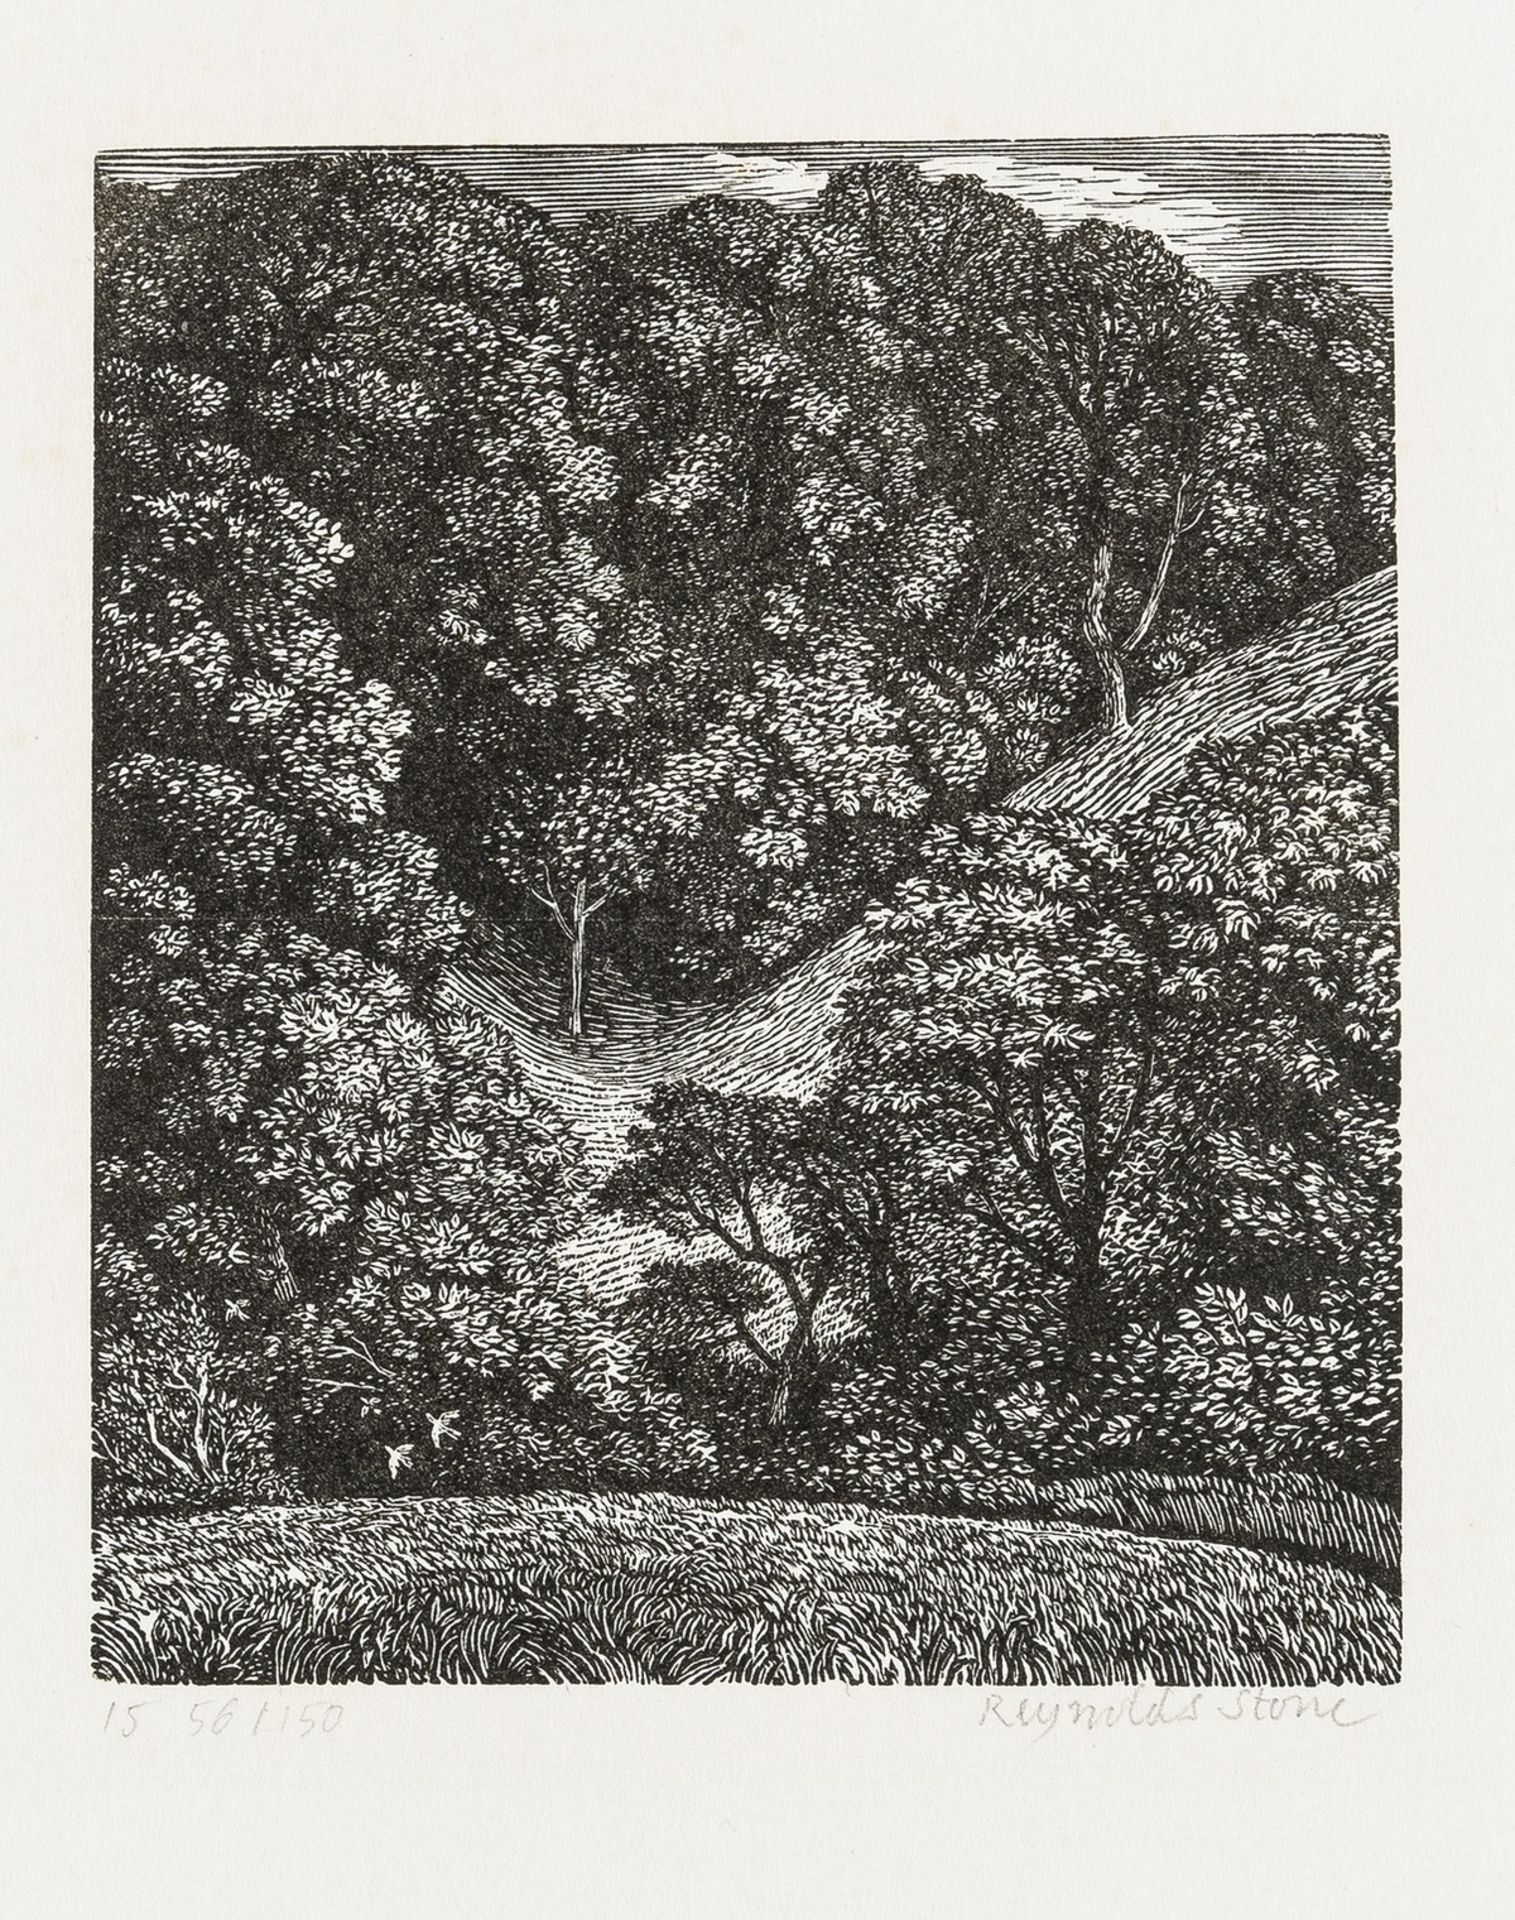 Stone (Reynolds) The Old Rectory: a Suite of Wood Engravings..., one of 150 sets, Litton Cheney …